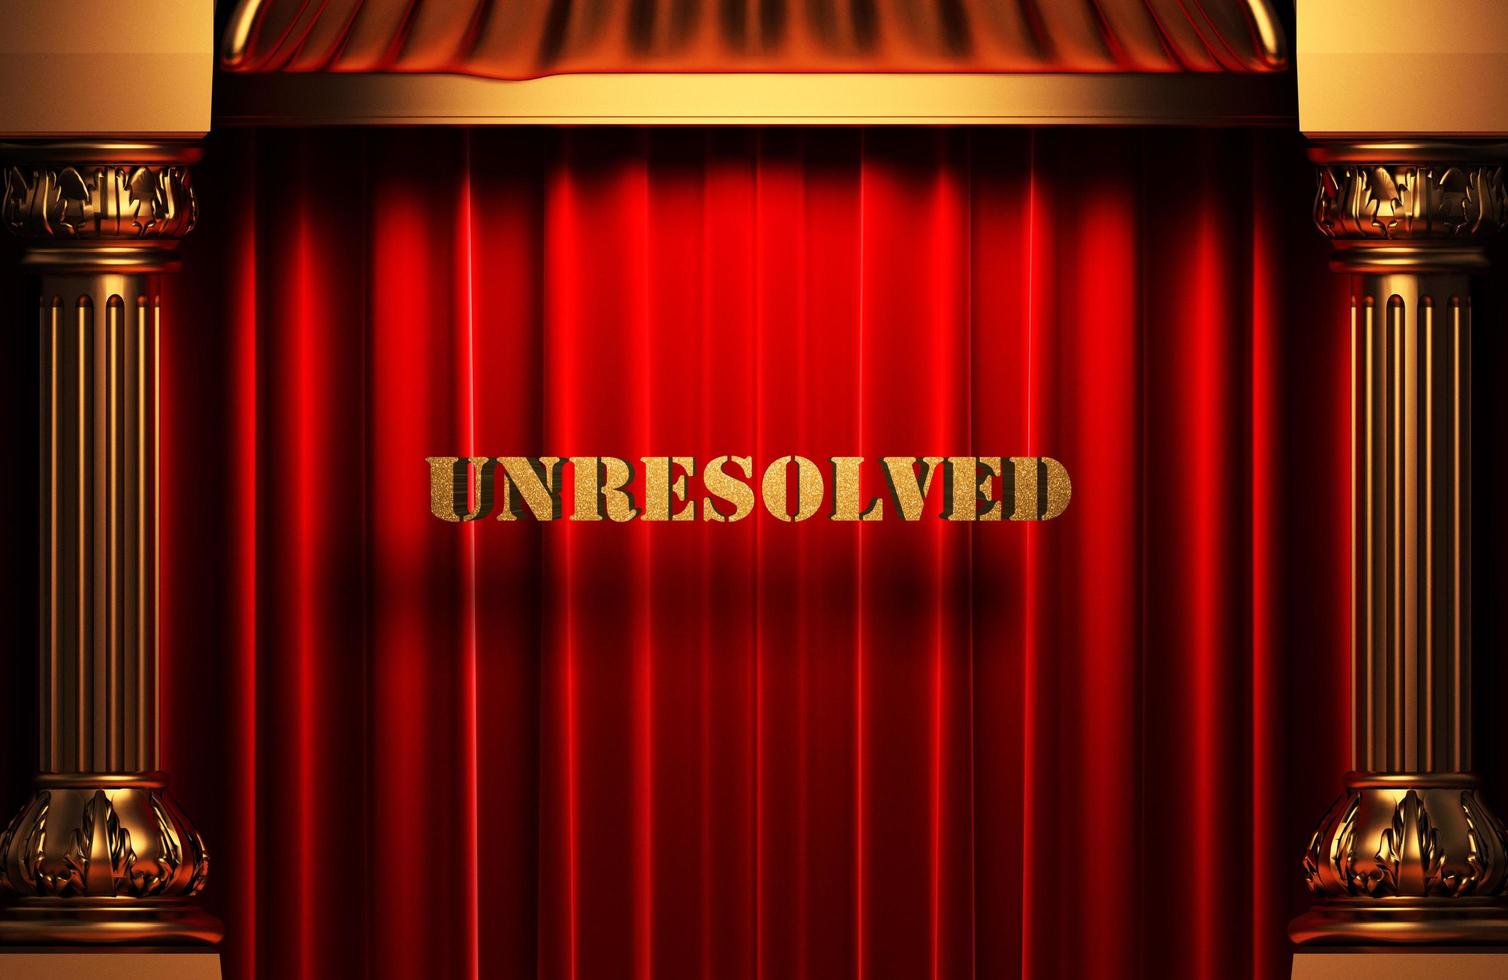 unresolved golden word on red curtain photo